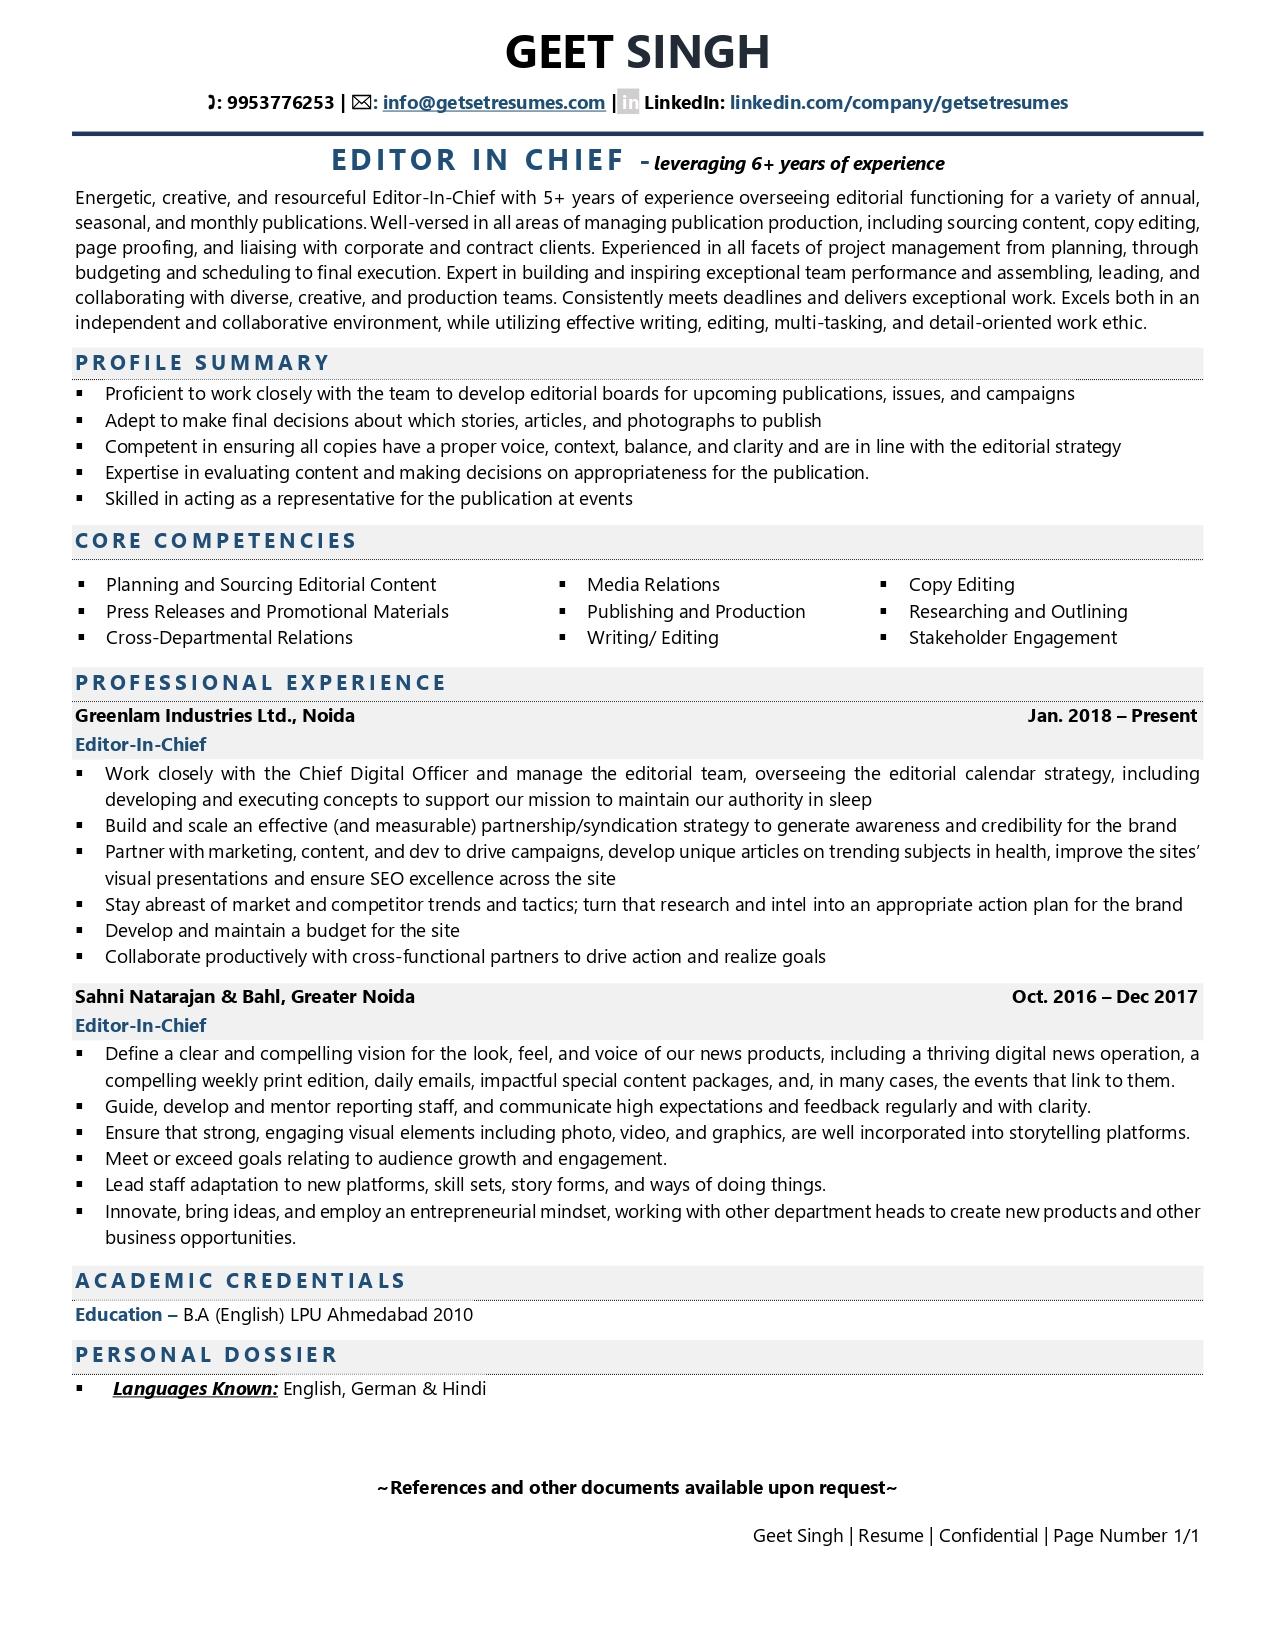 Editor in Chief - Resume Example & Template